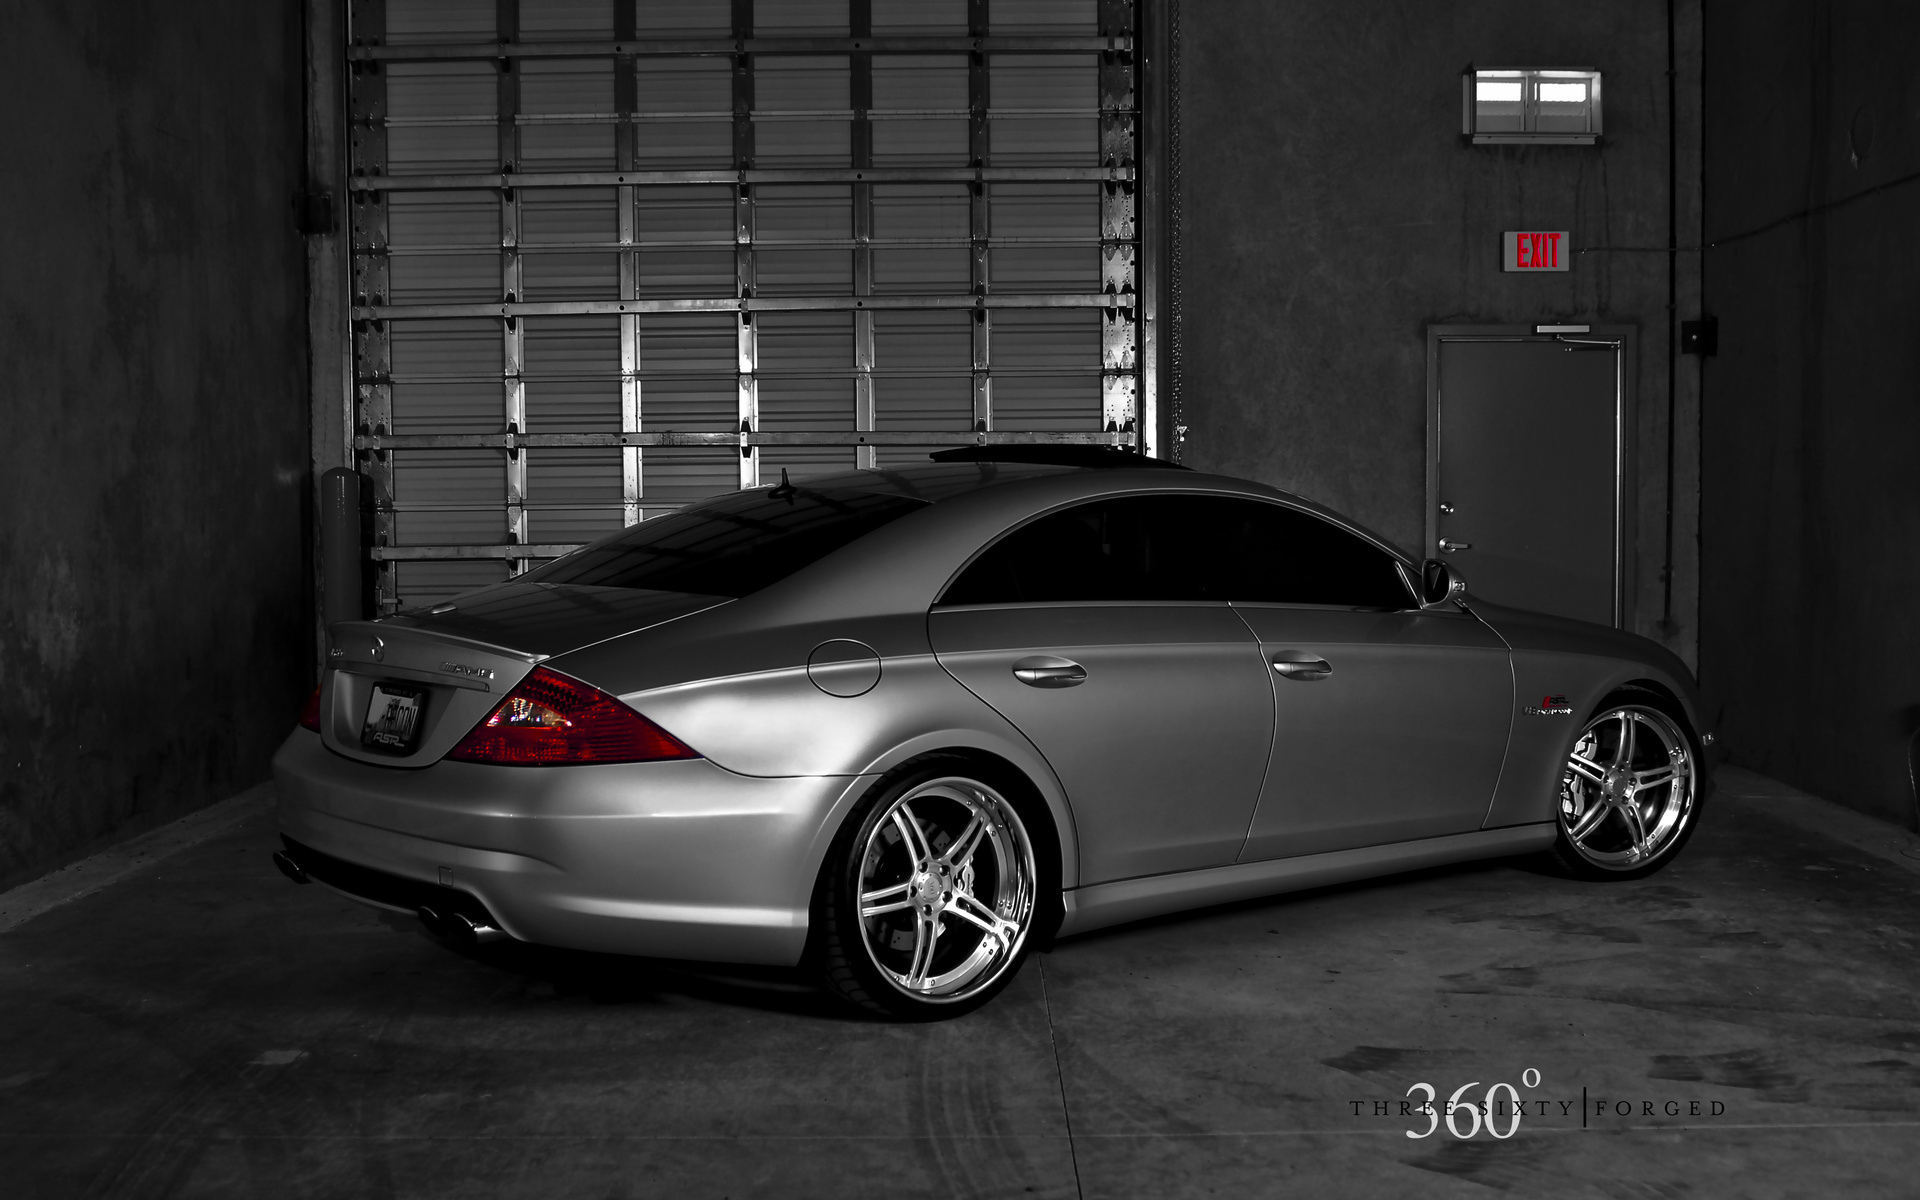 silver benz, тюнинг cls, 360 forged